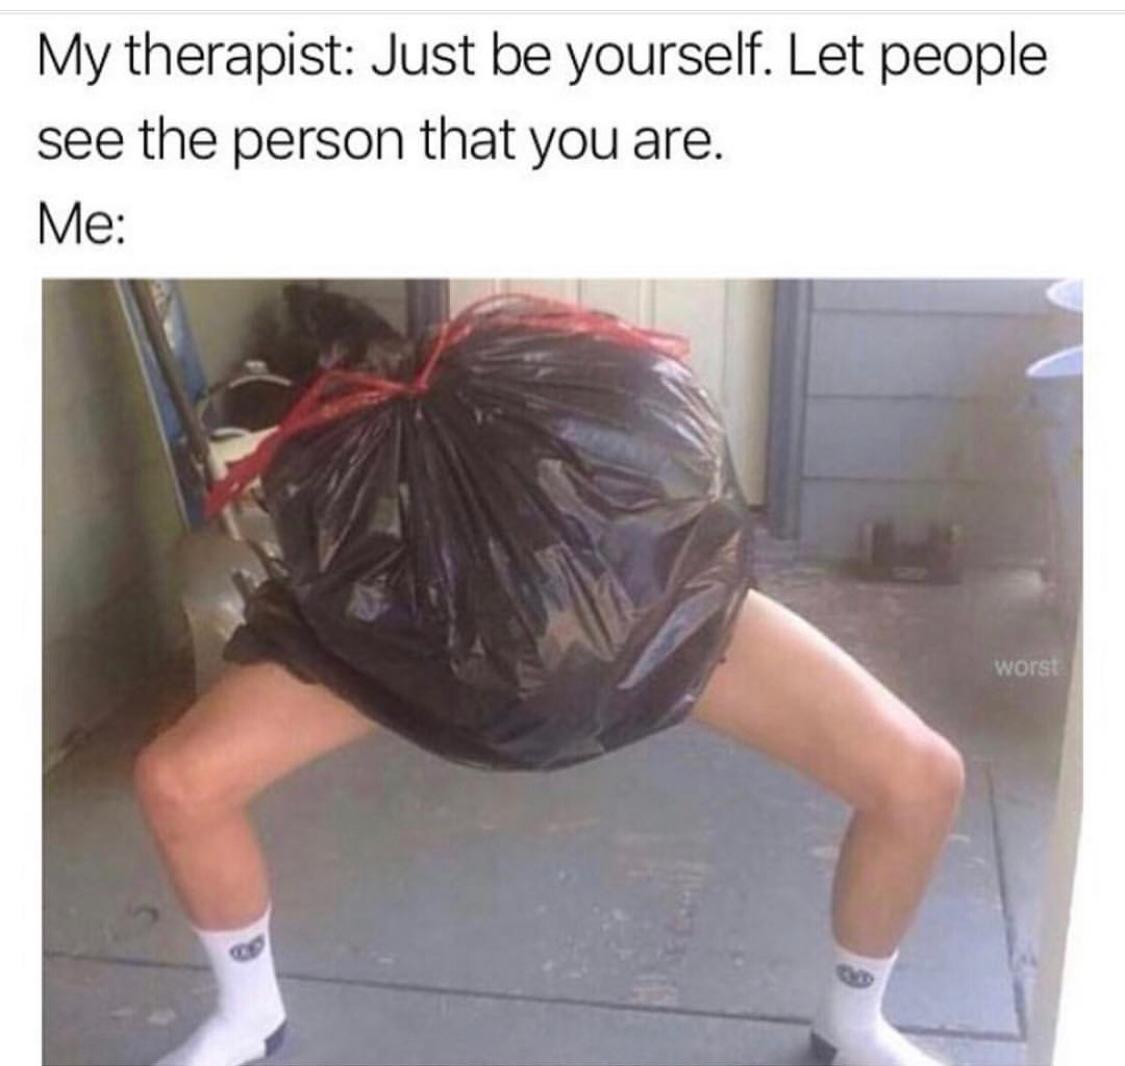 memes - my therapist just be yourself - My therapist Just be yourself. Let people see the person that you are. Me worst